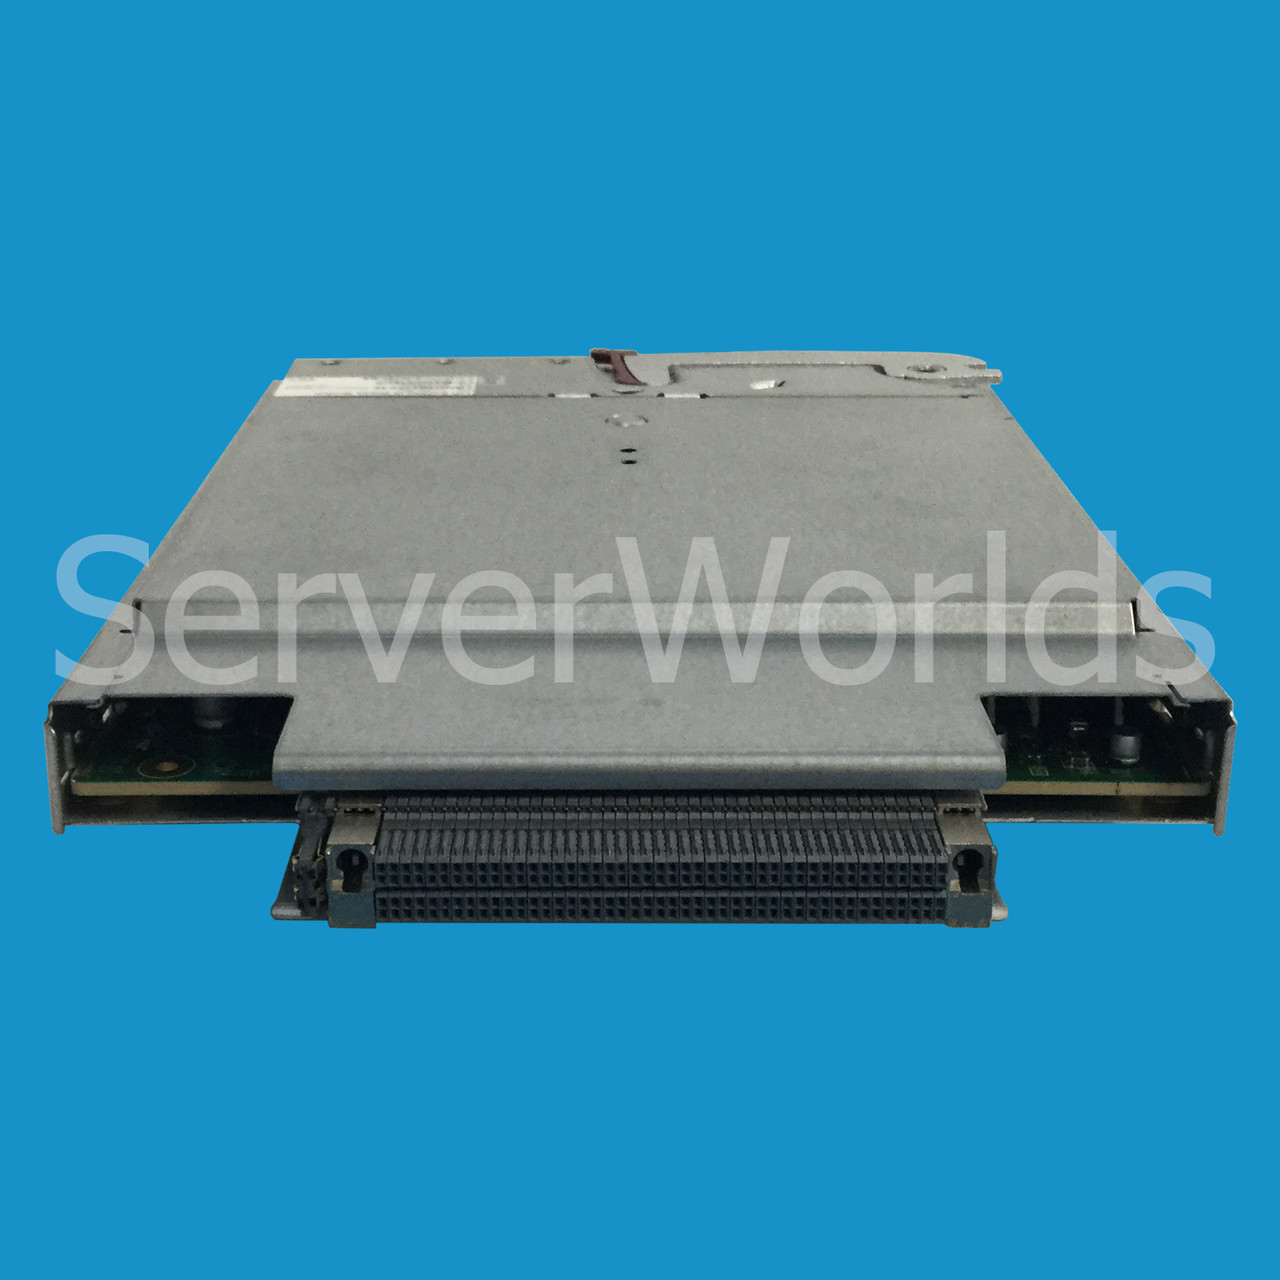 HPe 716102-001 BLc 6125XLG 40G Blade switch 711307-B21